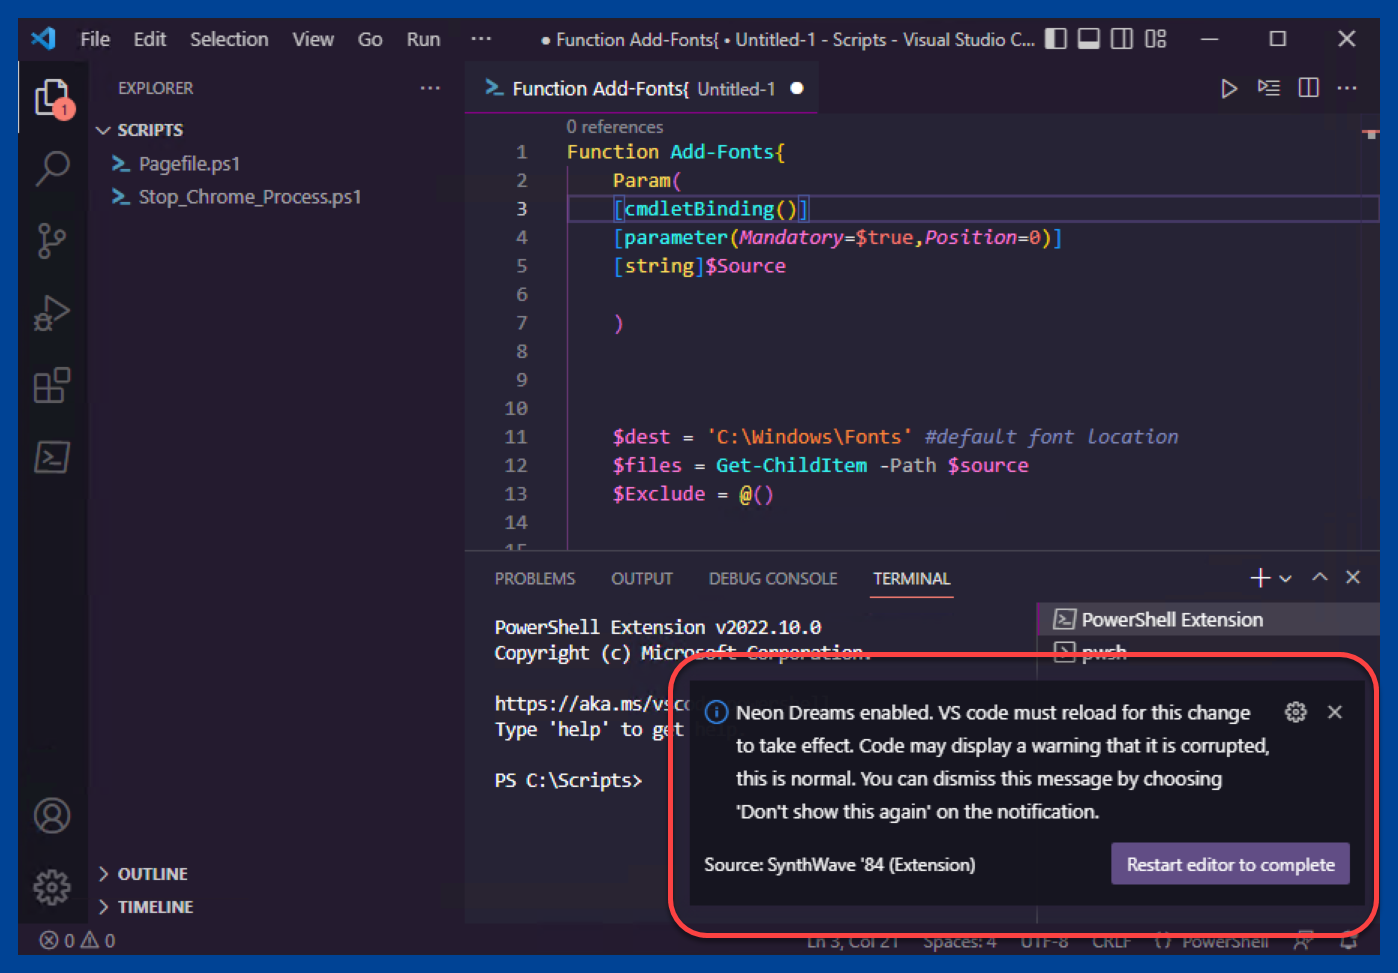 Prompt indicating that VS Code needs to reload for the changes to take effect